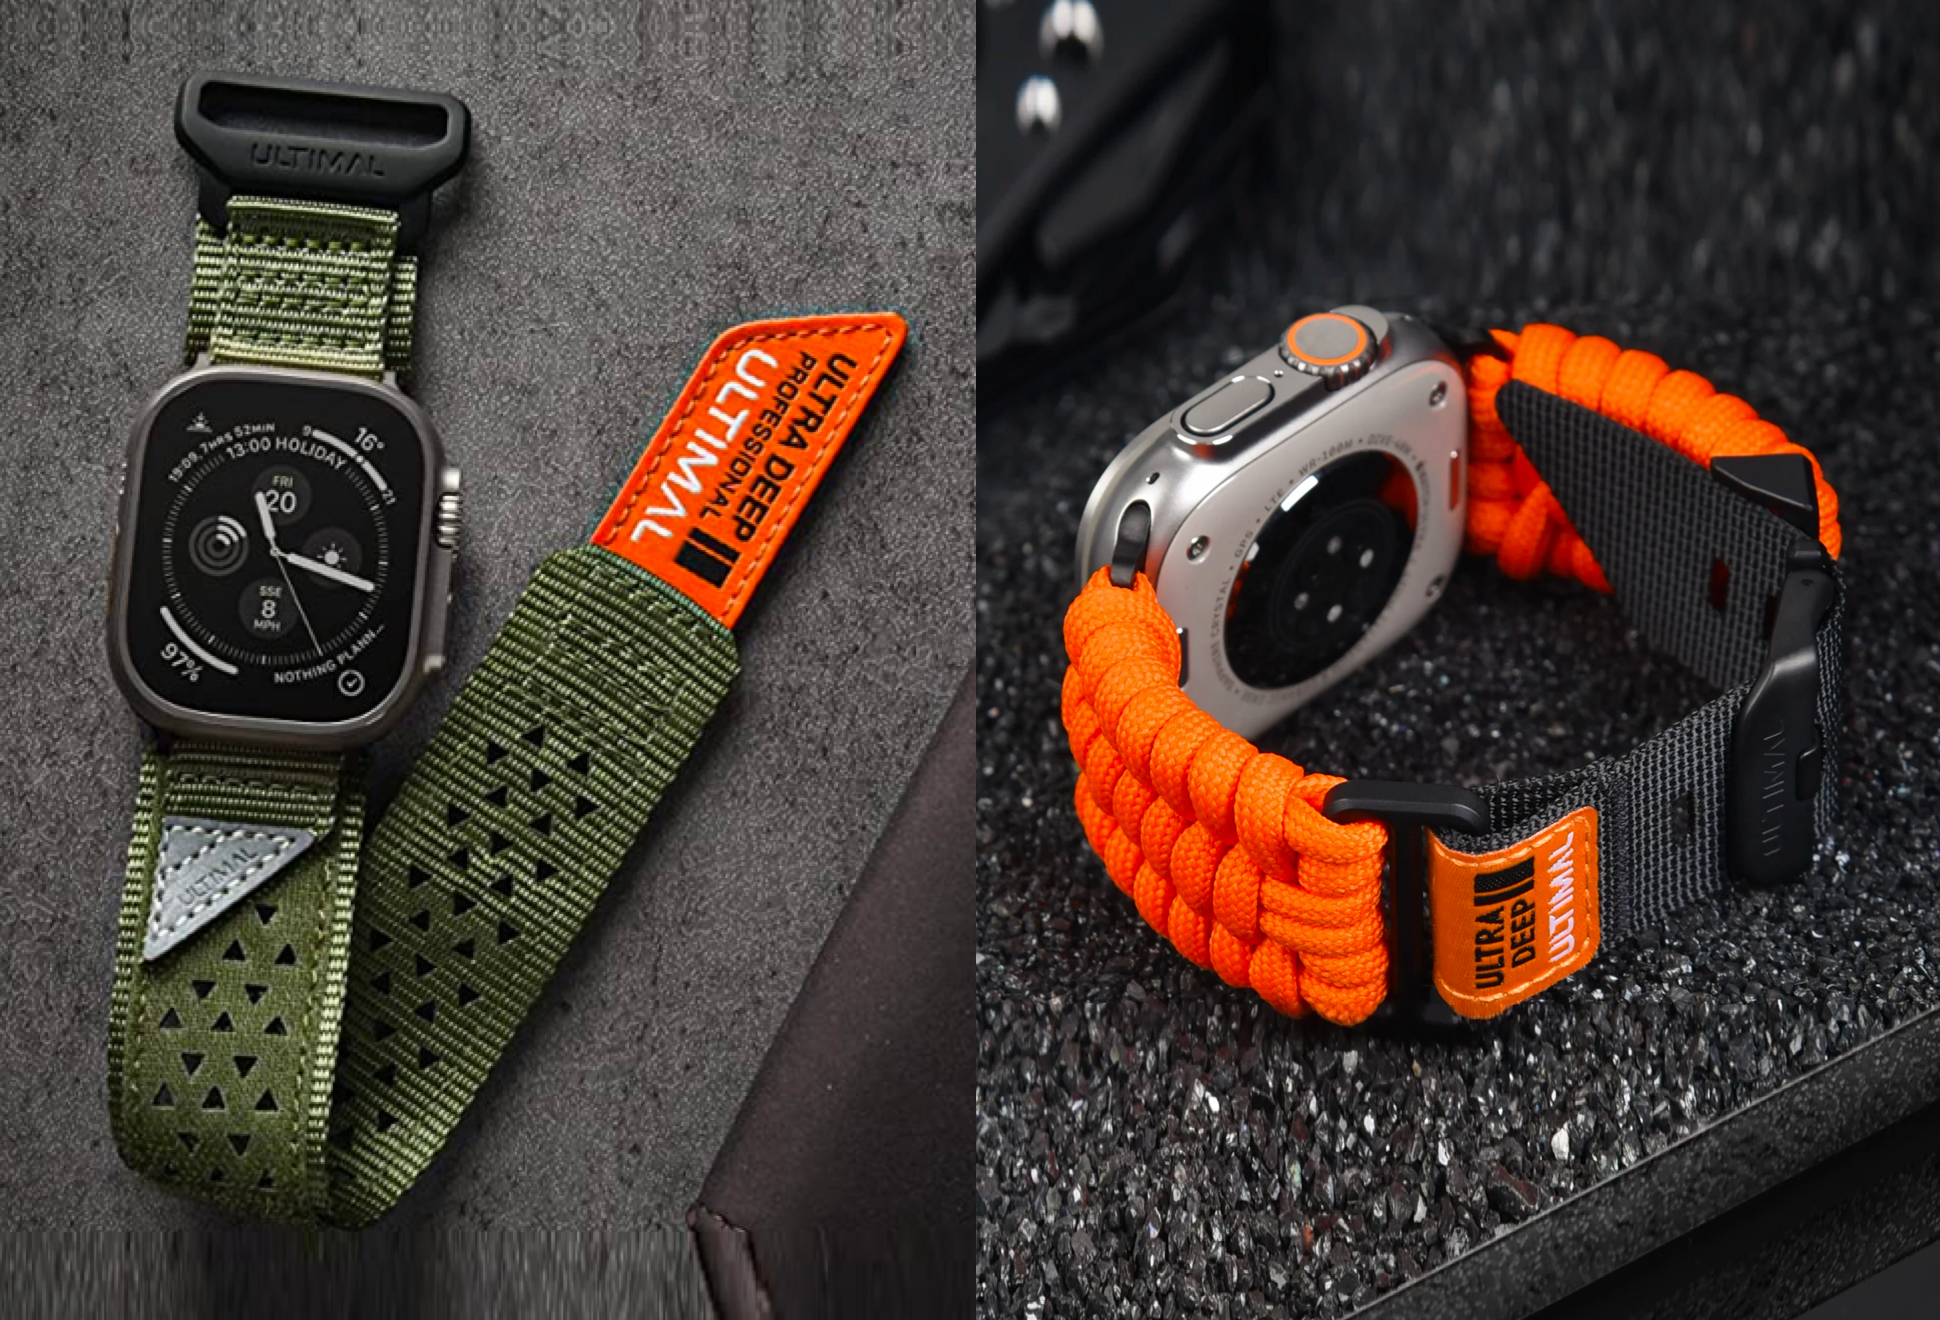 RelÓgio Ultimal Apple Watch Bands | Image